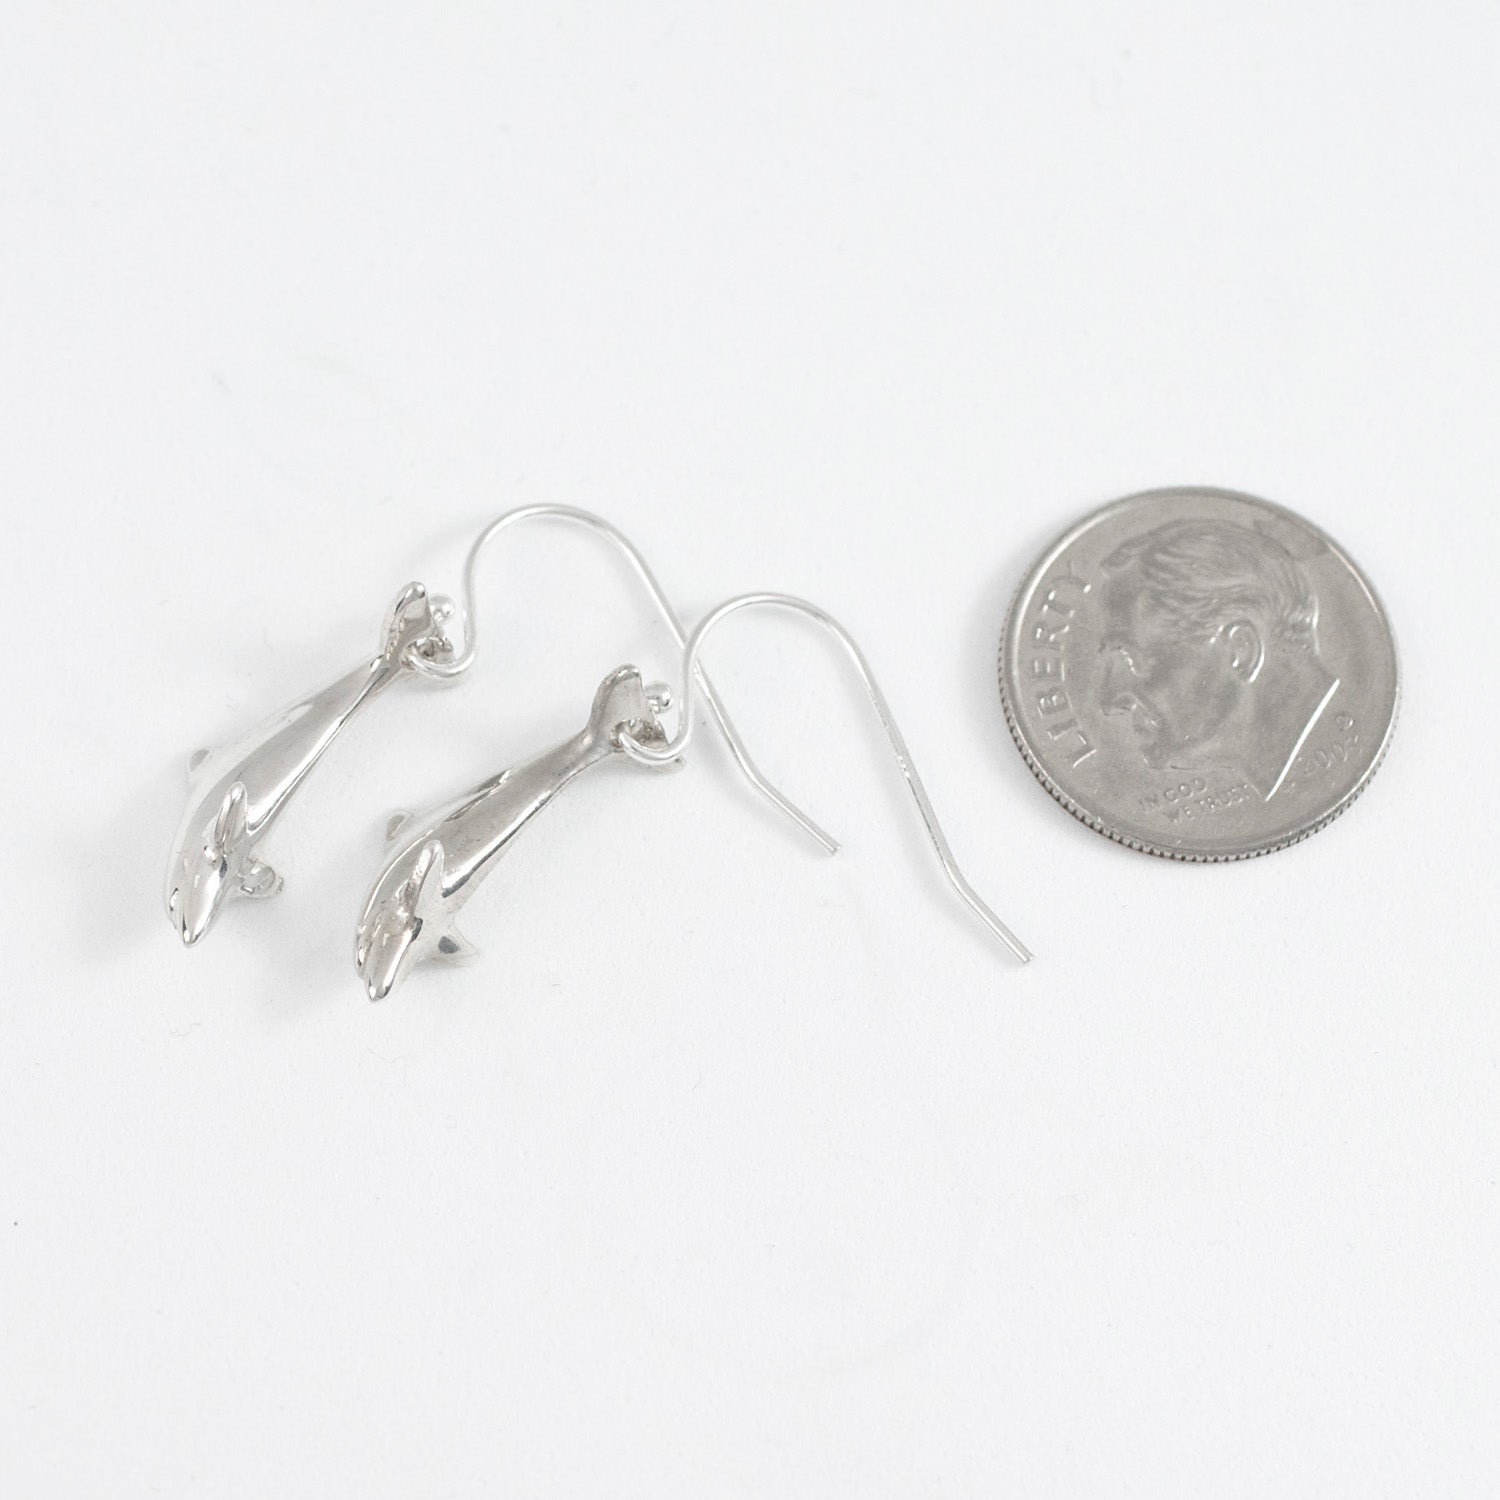 Dolphin  Drop Earrings Sterling Silver,  Ocean Theme Mini Realistic Sea Life Dolphin Earrings - The Tool Store